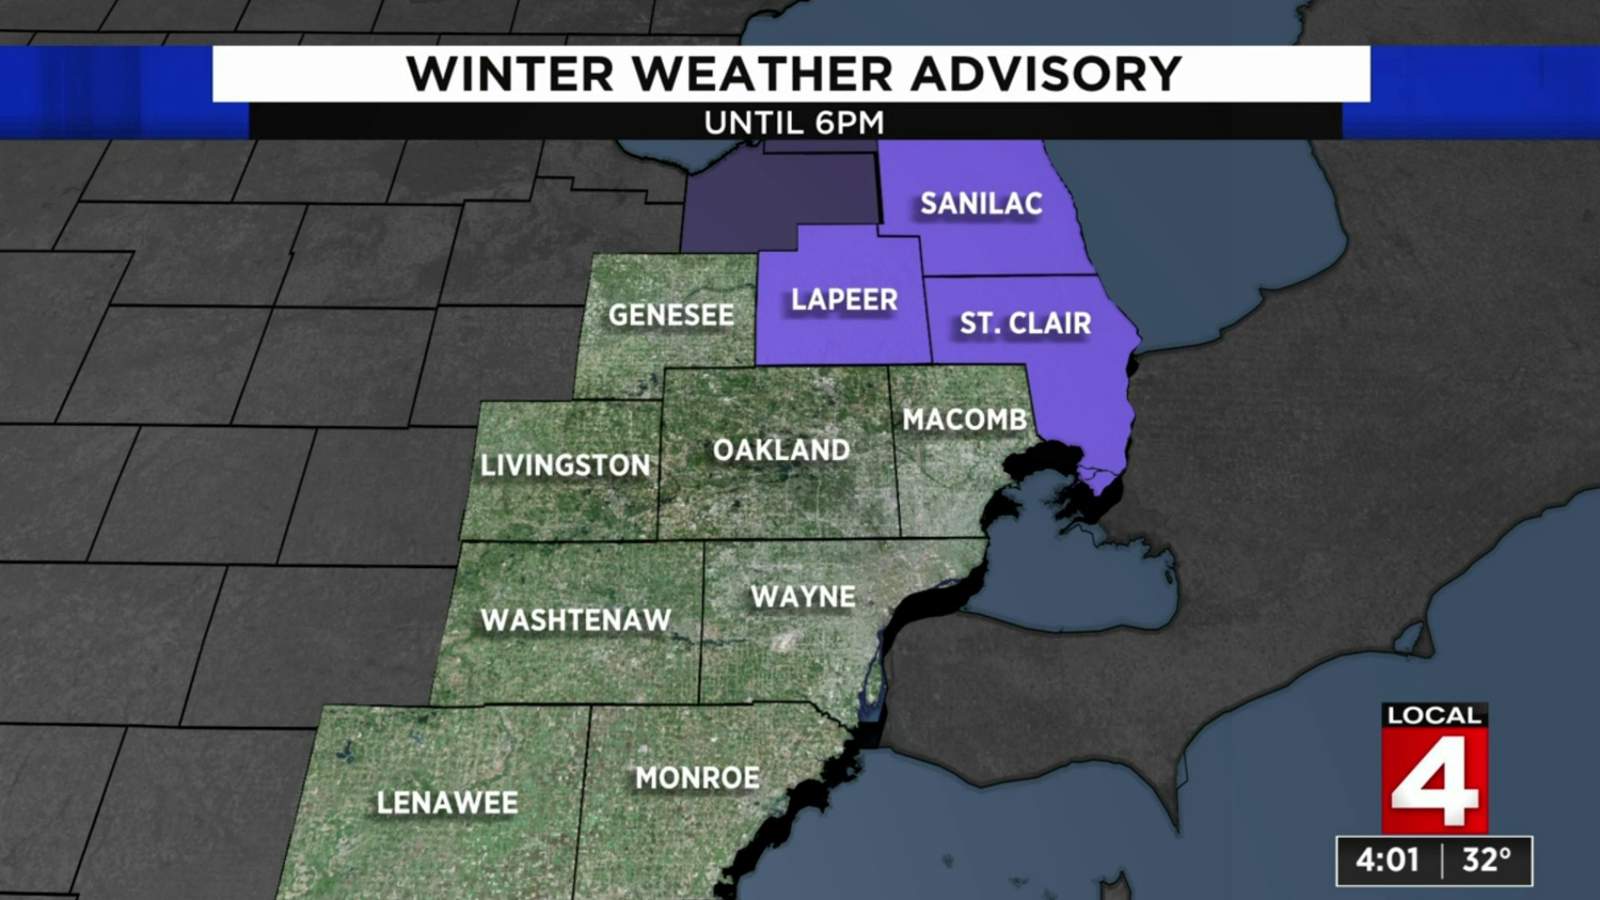 Metro Detroit weather: Looking ahead to more snowfall as this winter storm wraps up